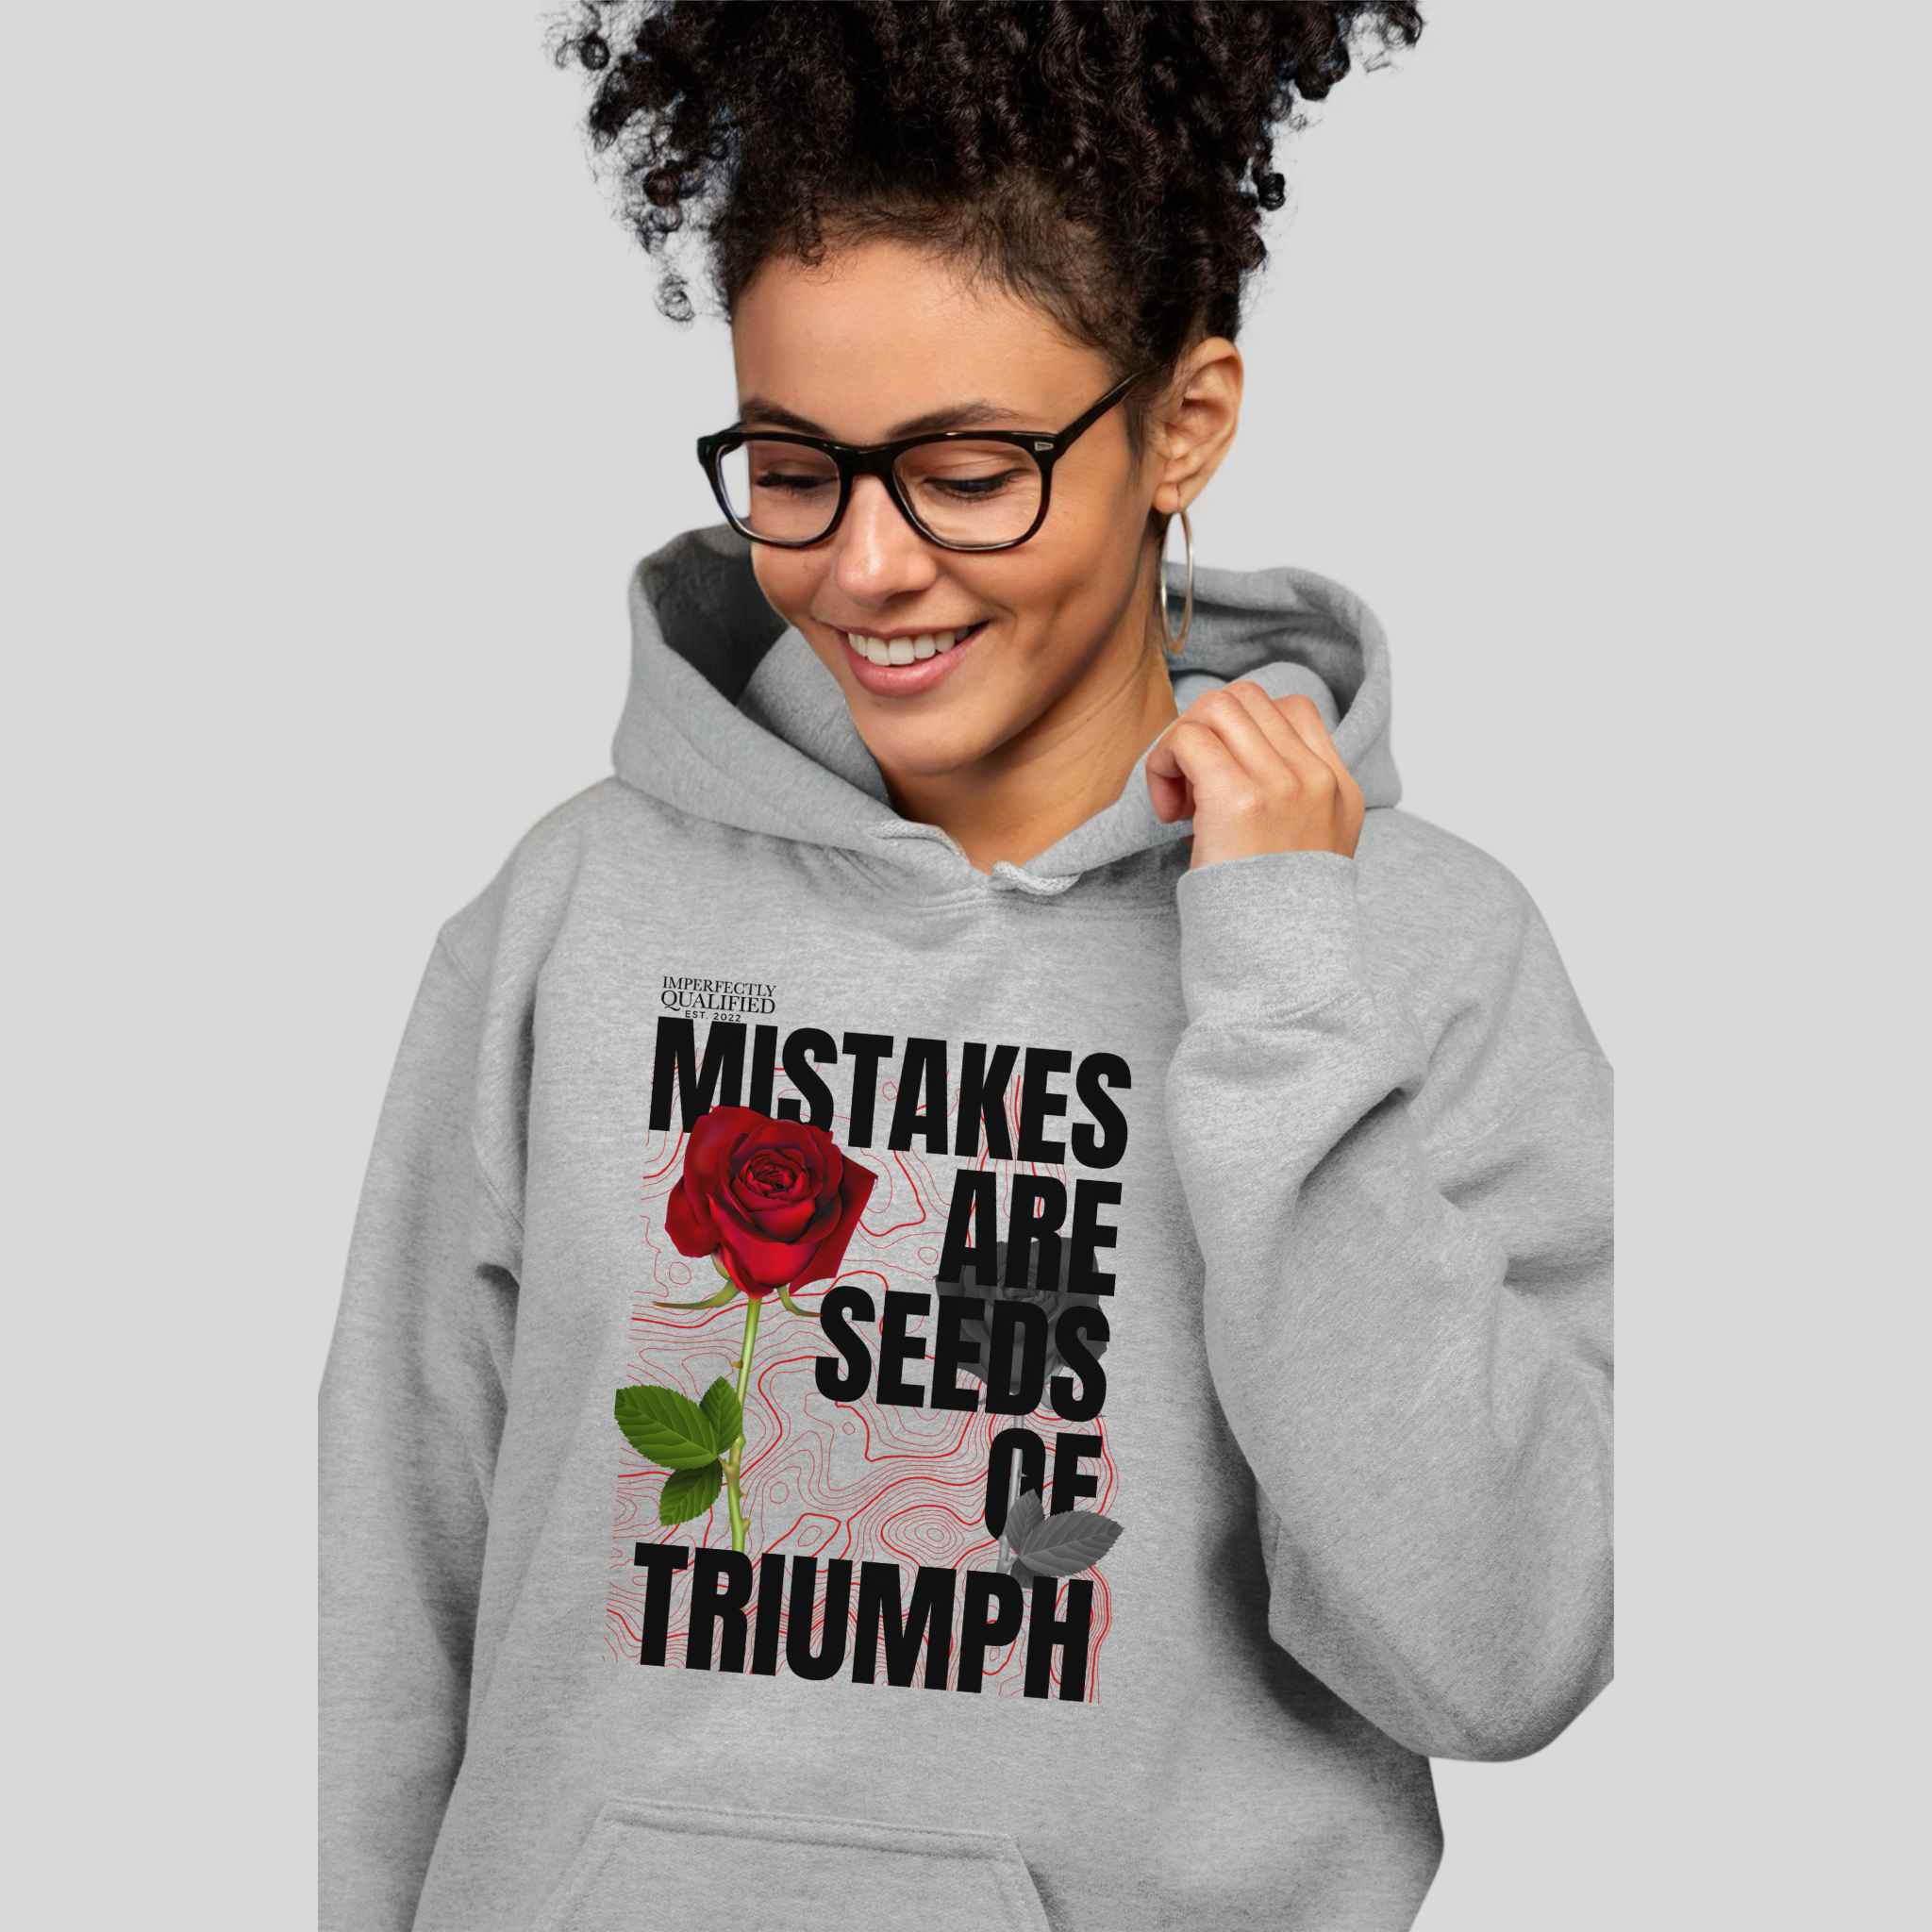 Heather Gray hoodie with motivational / inspirational phrase "Mistakes are Seeds of Triumph" in bold letters, creating a fashion statement that also carries a profound message.